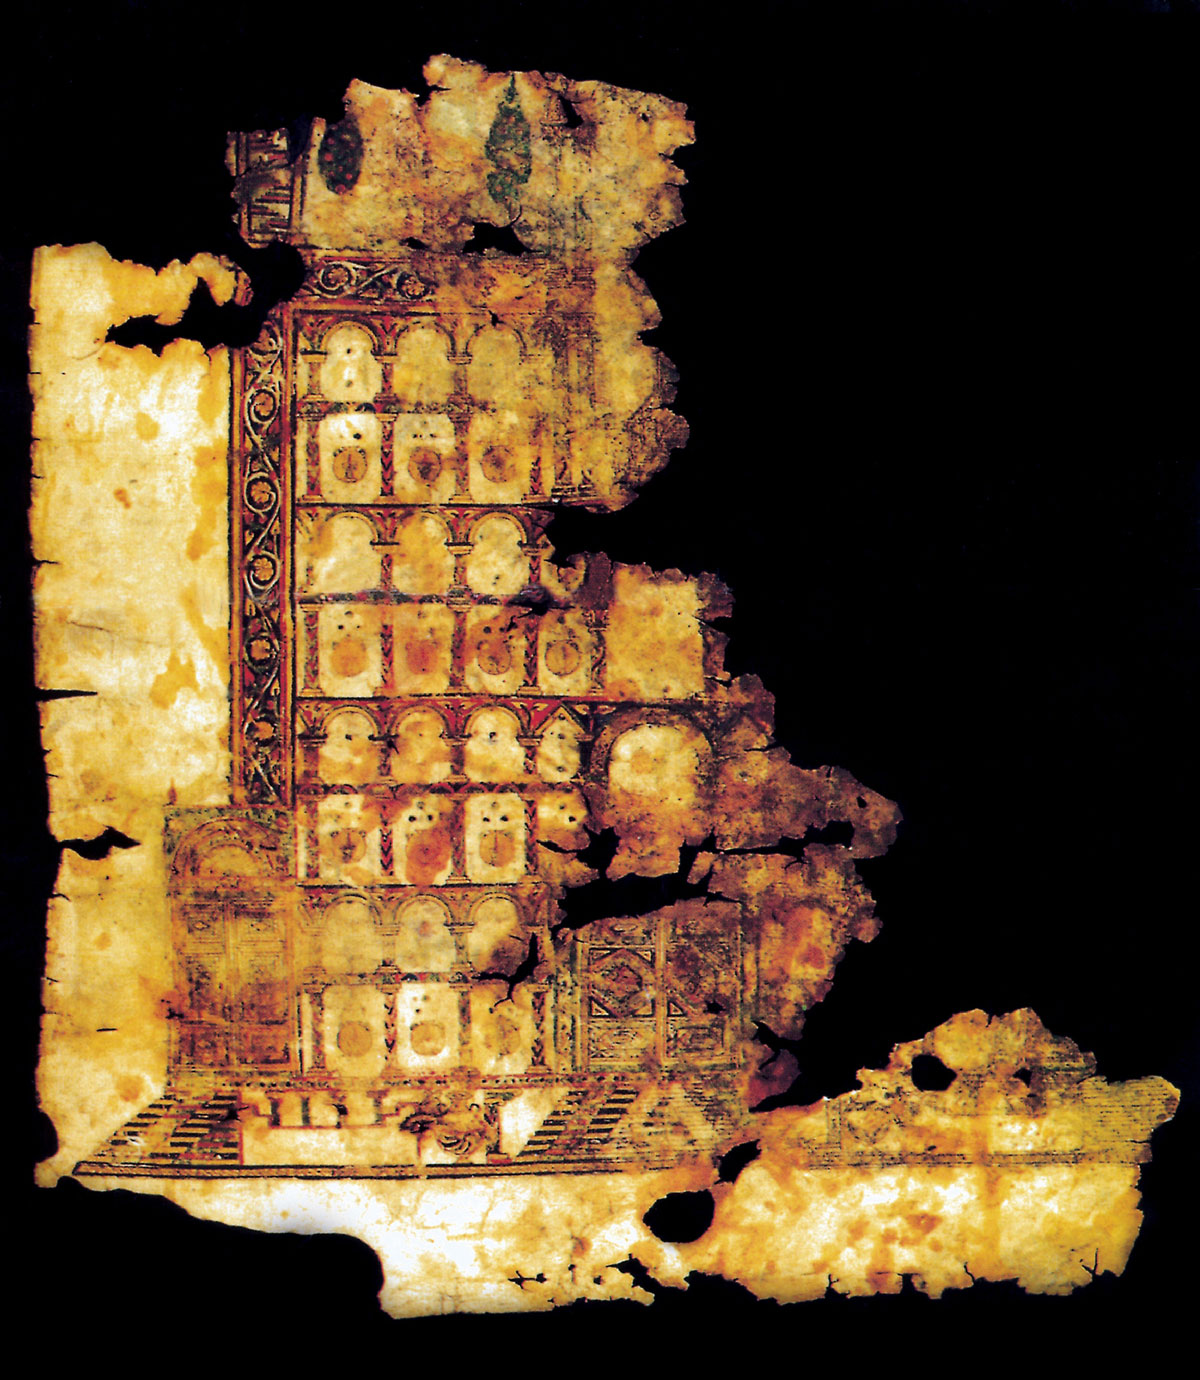 Photograph of an illustrated Koran frontispiece fragment, circa 8th century, from the Great Mosque in Sanaa, Yemen.